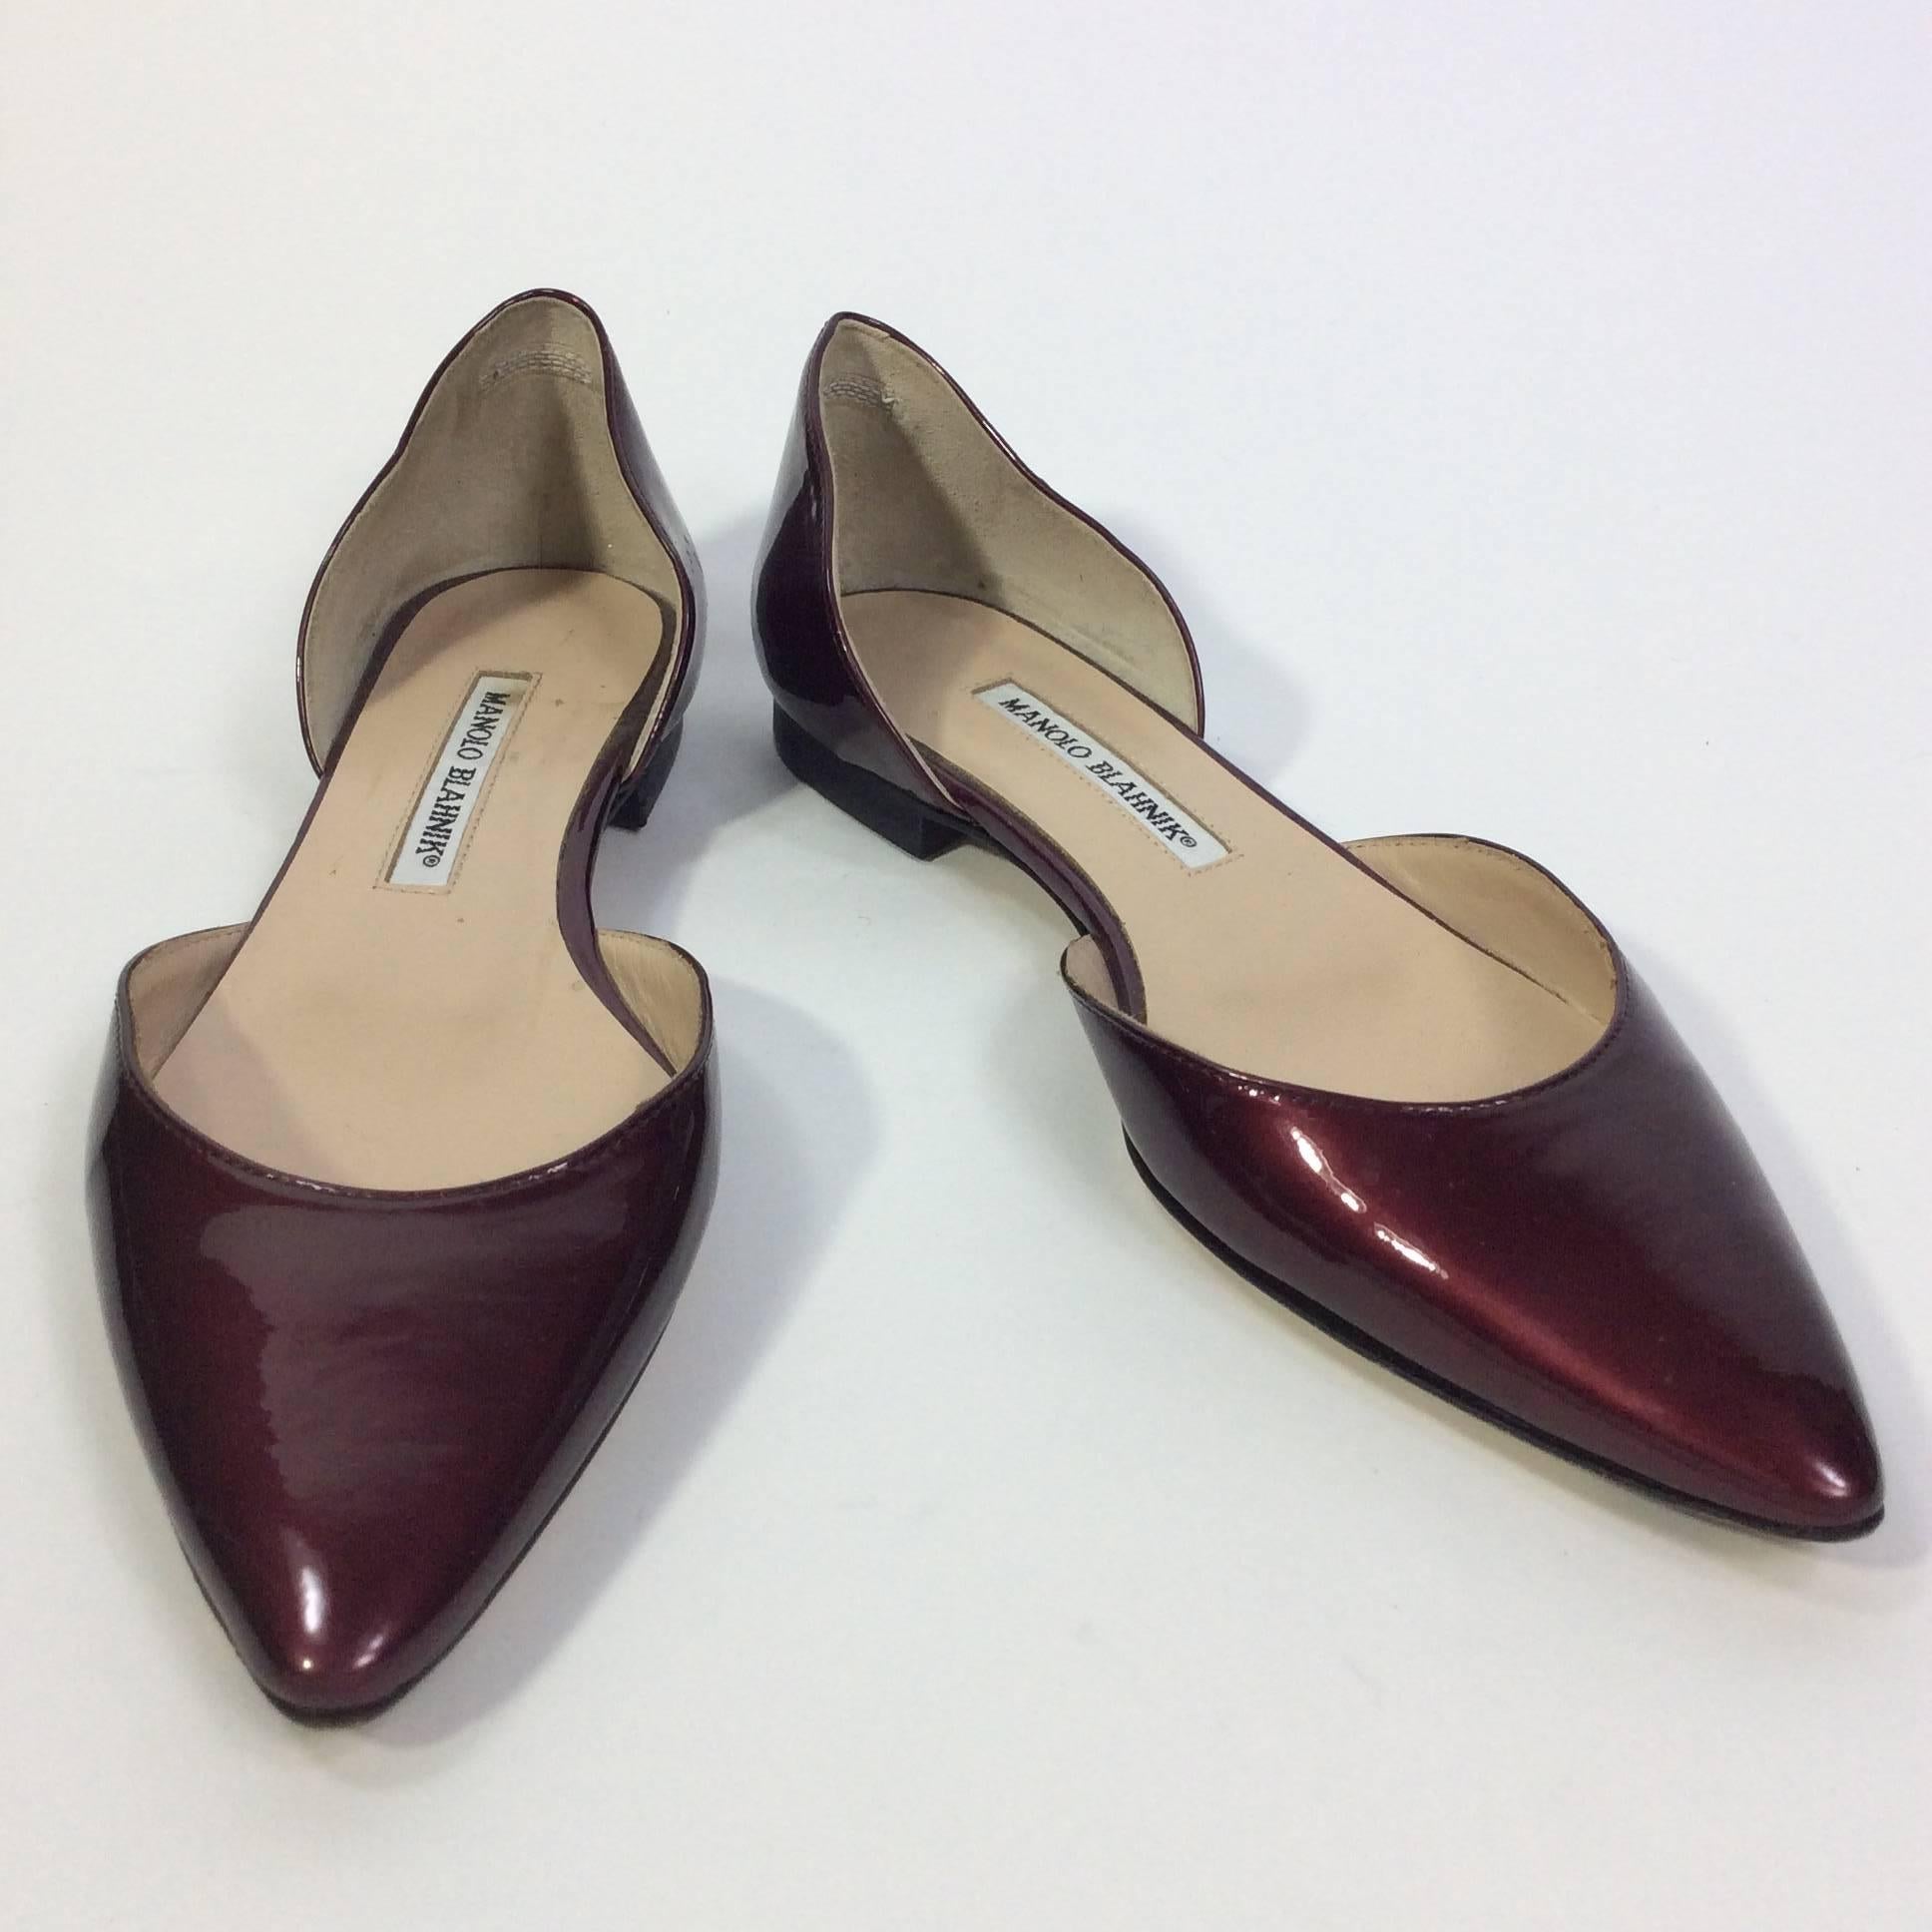 Maroon Patent Pointed Toe Ballet Flats
0.5 inch heel
3.25 inch sole width
Shiny maroon color
Size 37.5 (equates to US 7)
Patent Leather